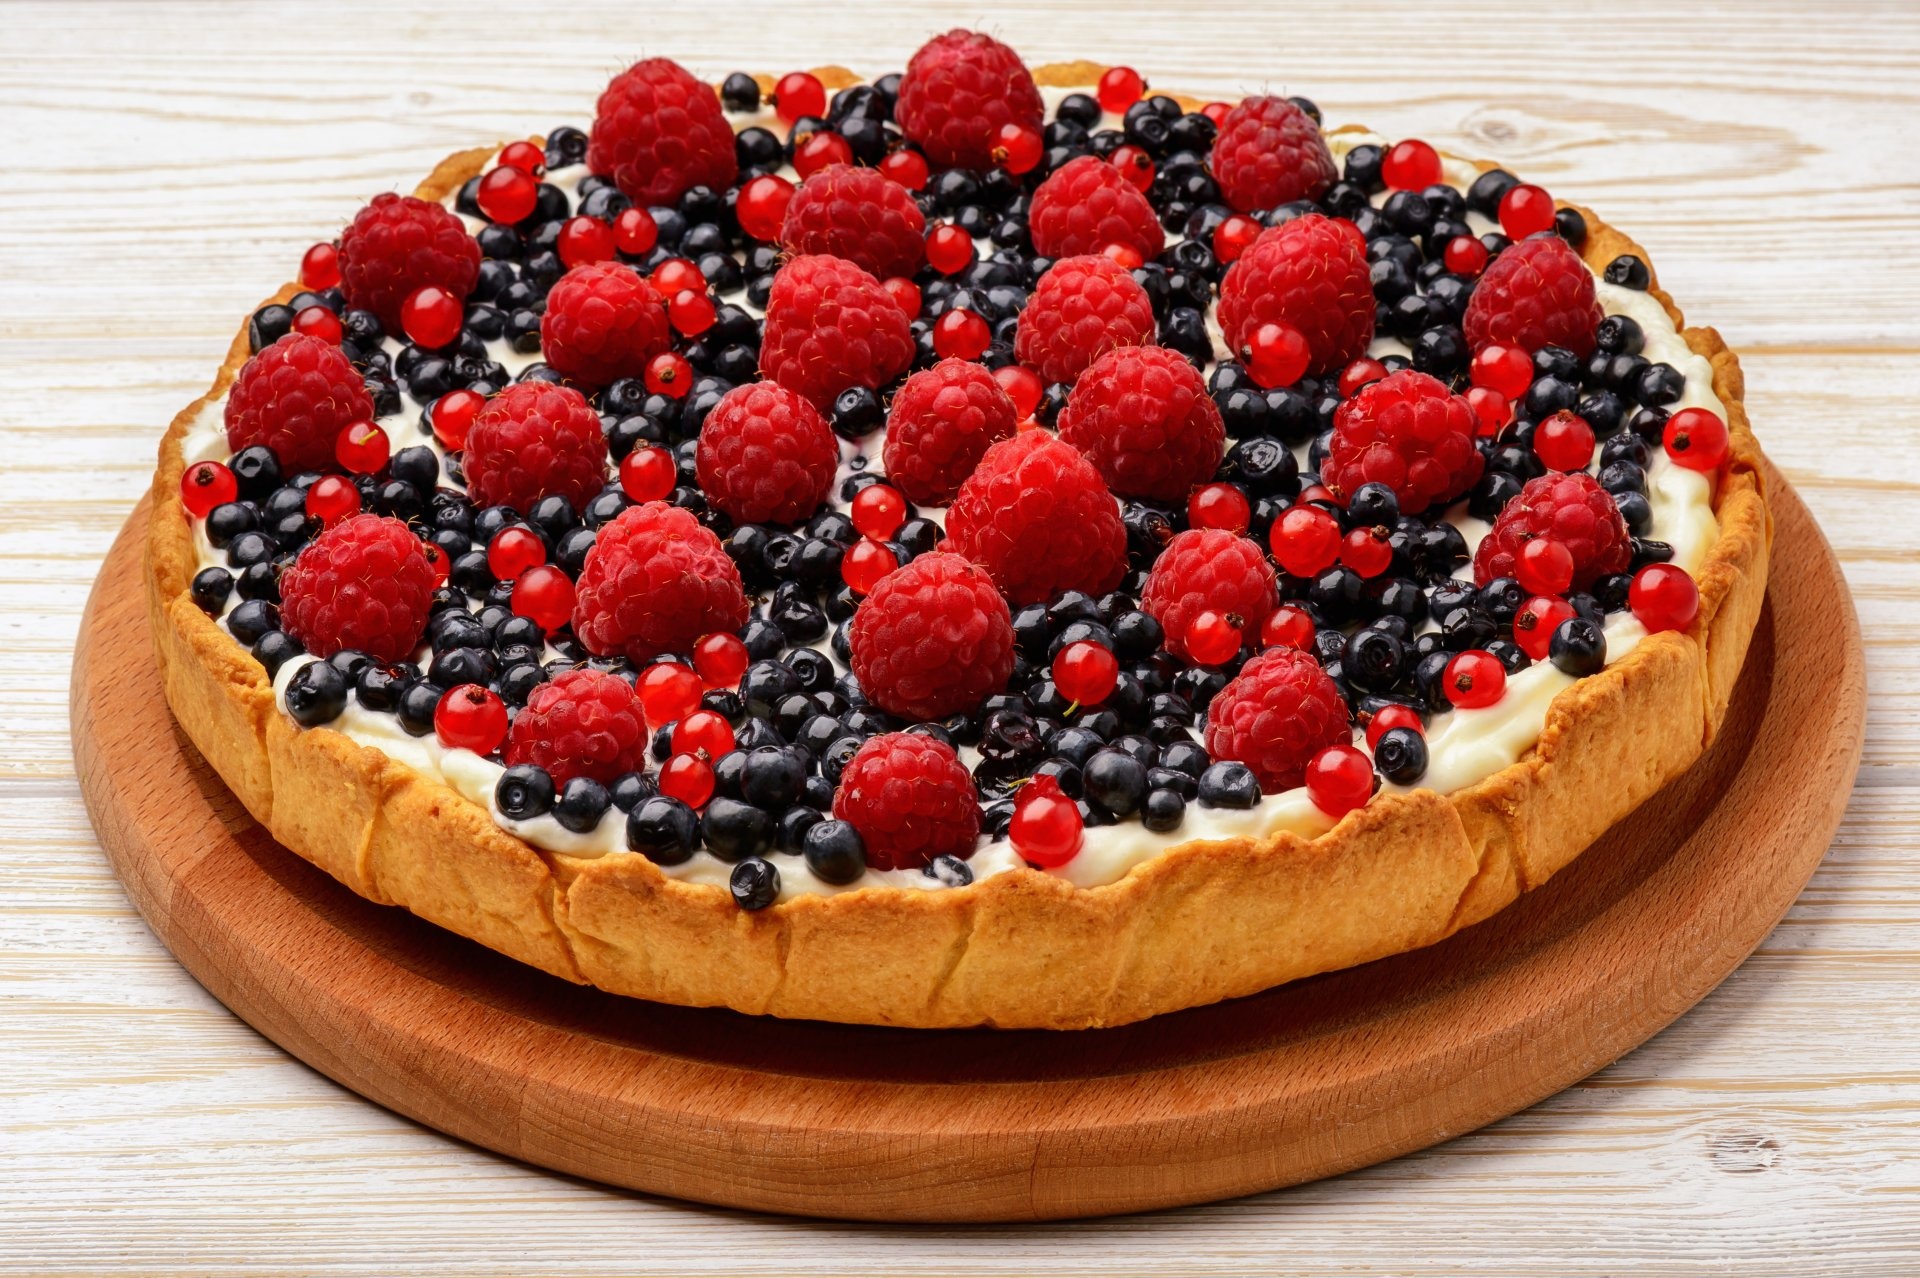 Tart: Enjoyed as a special treat for celebrations or holidays. 1920x1280 HD Background.